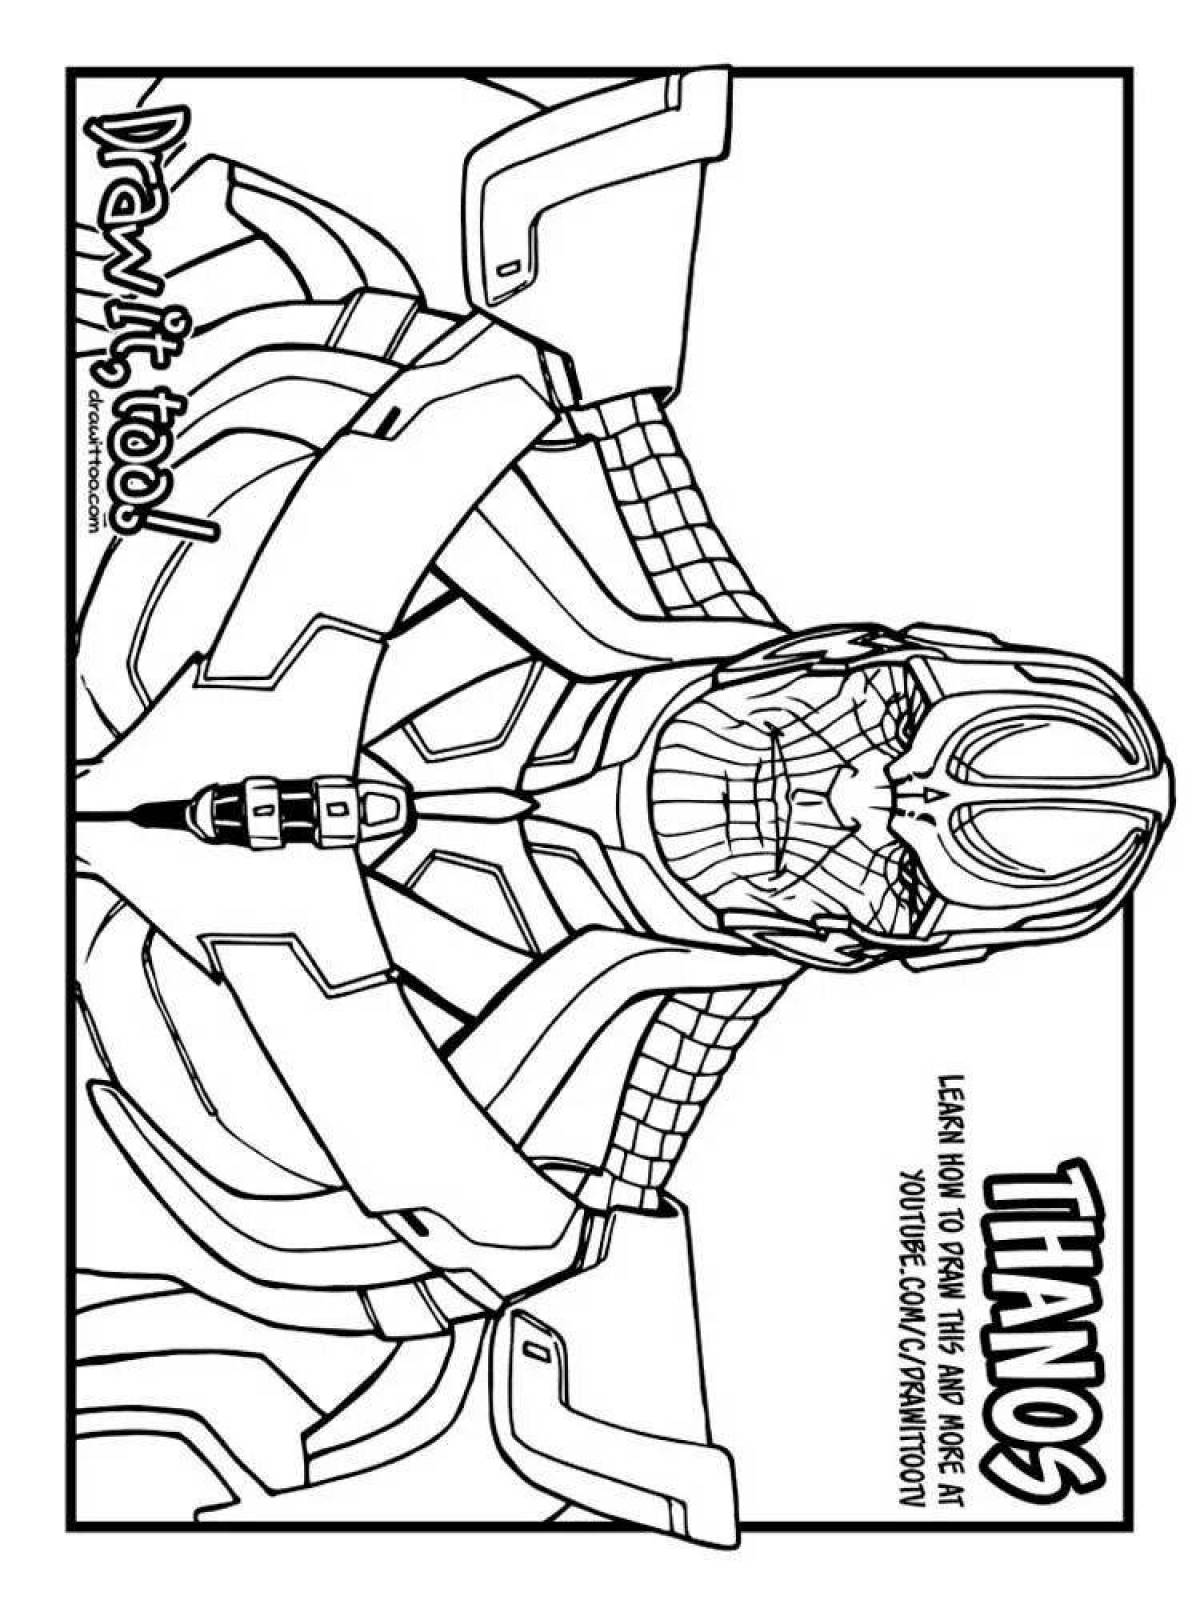 Glove of Thanos awesome coloring book